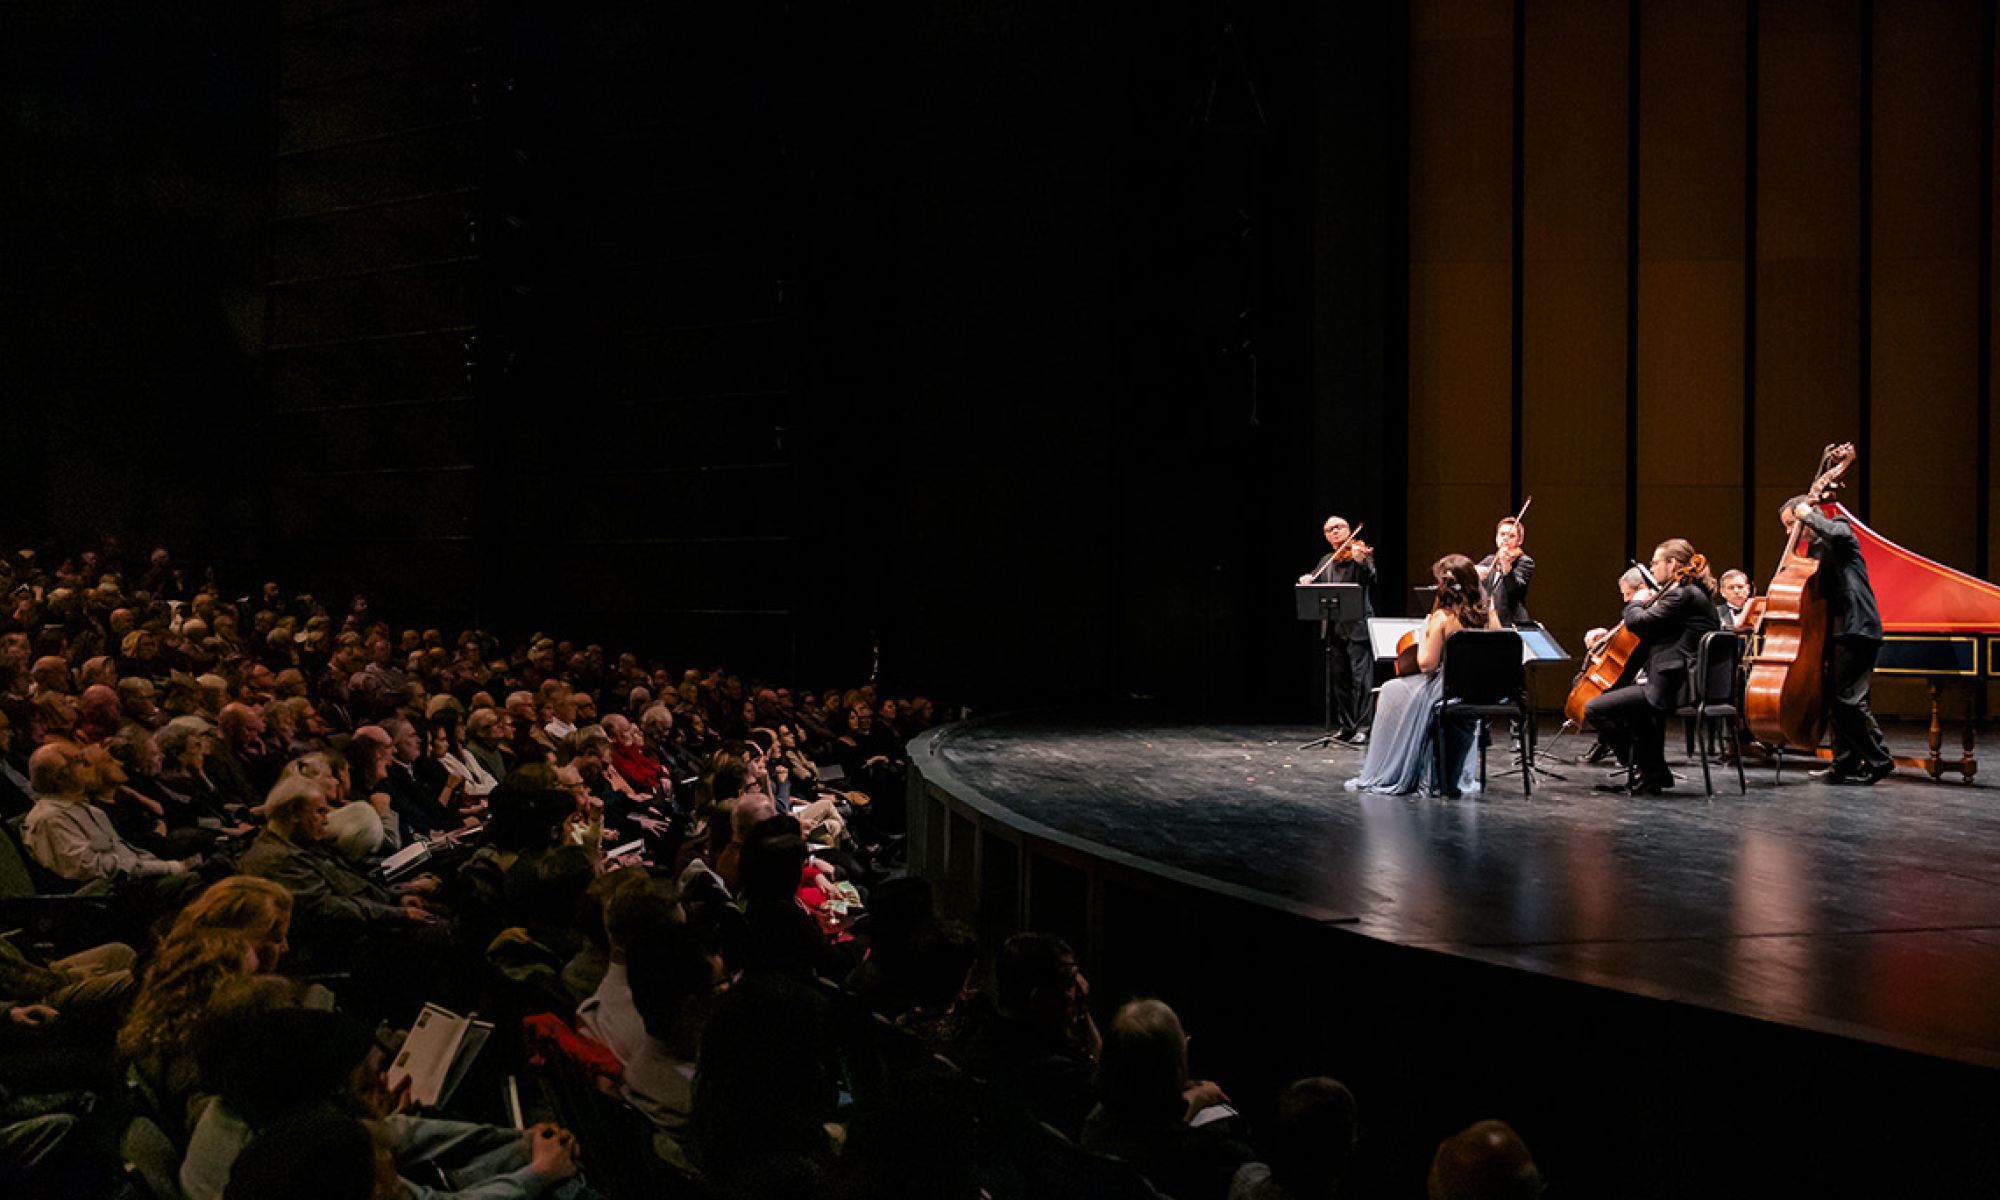 A view of the Brandenburg Concertos being performed from the side of the stage